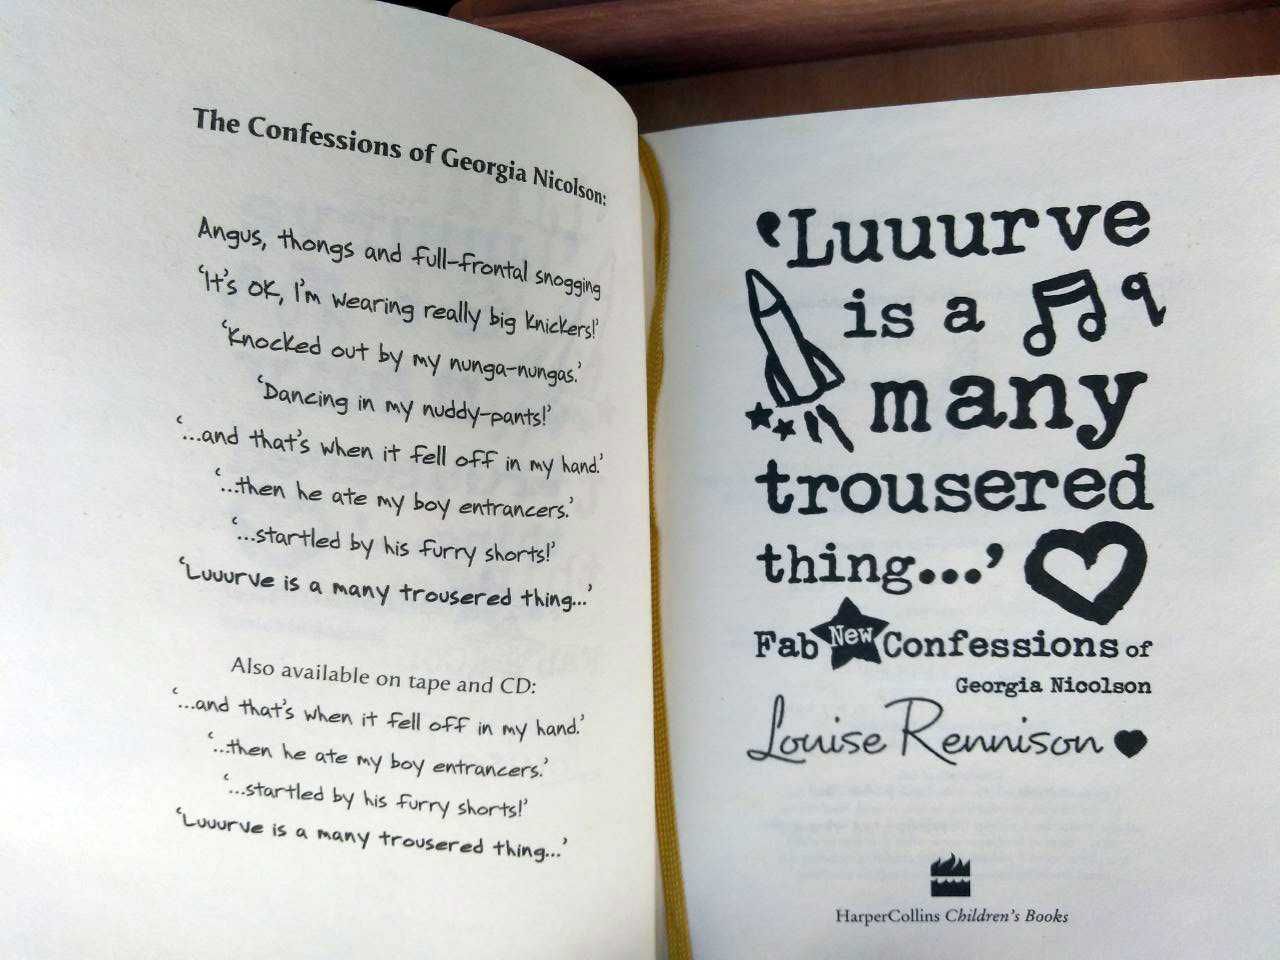 Louise Rennison - "Luuurve is a many trousered thing…" (на англ.)